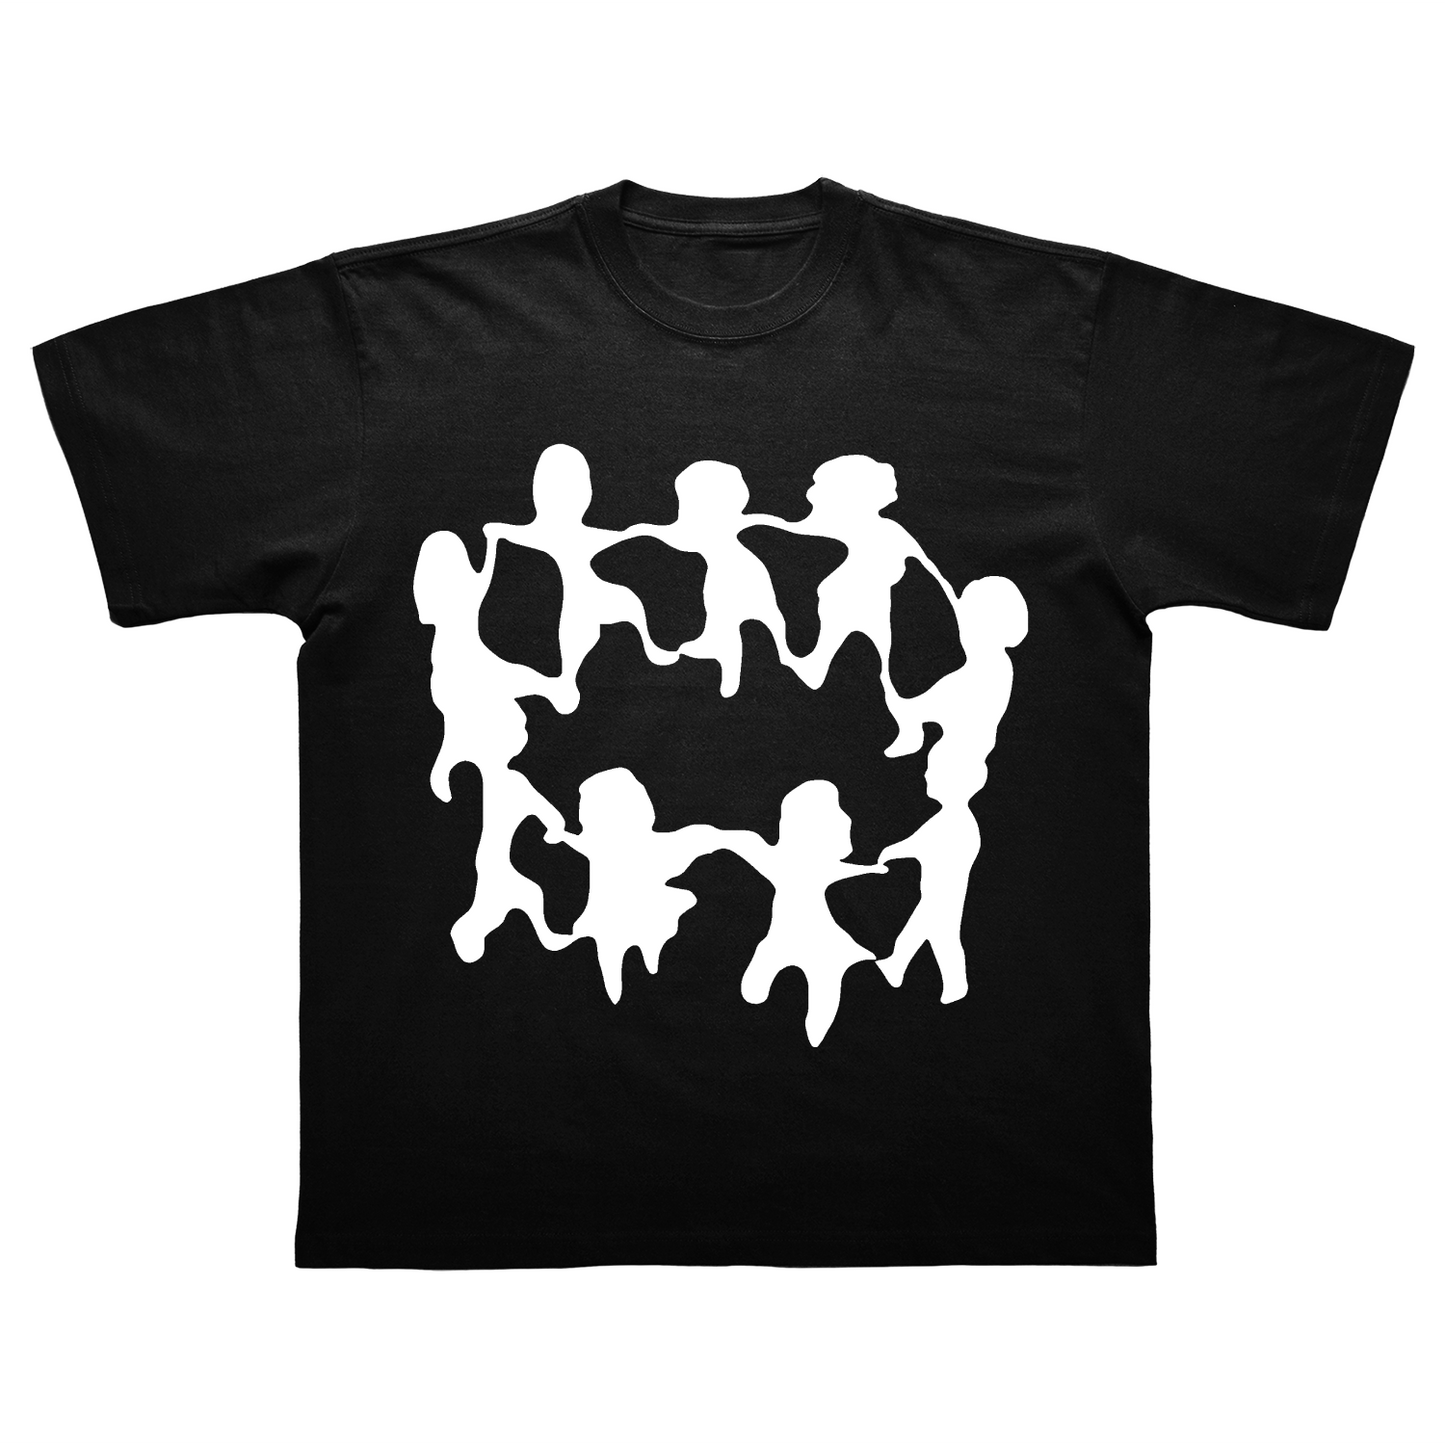 UNDERDOGS - its us TEE